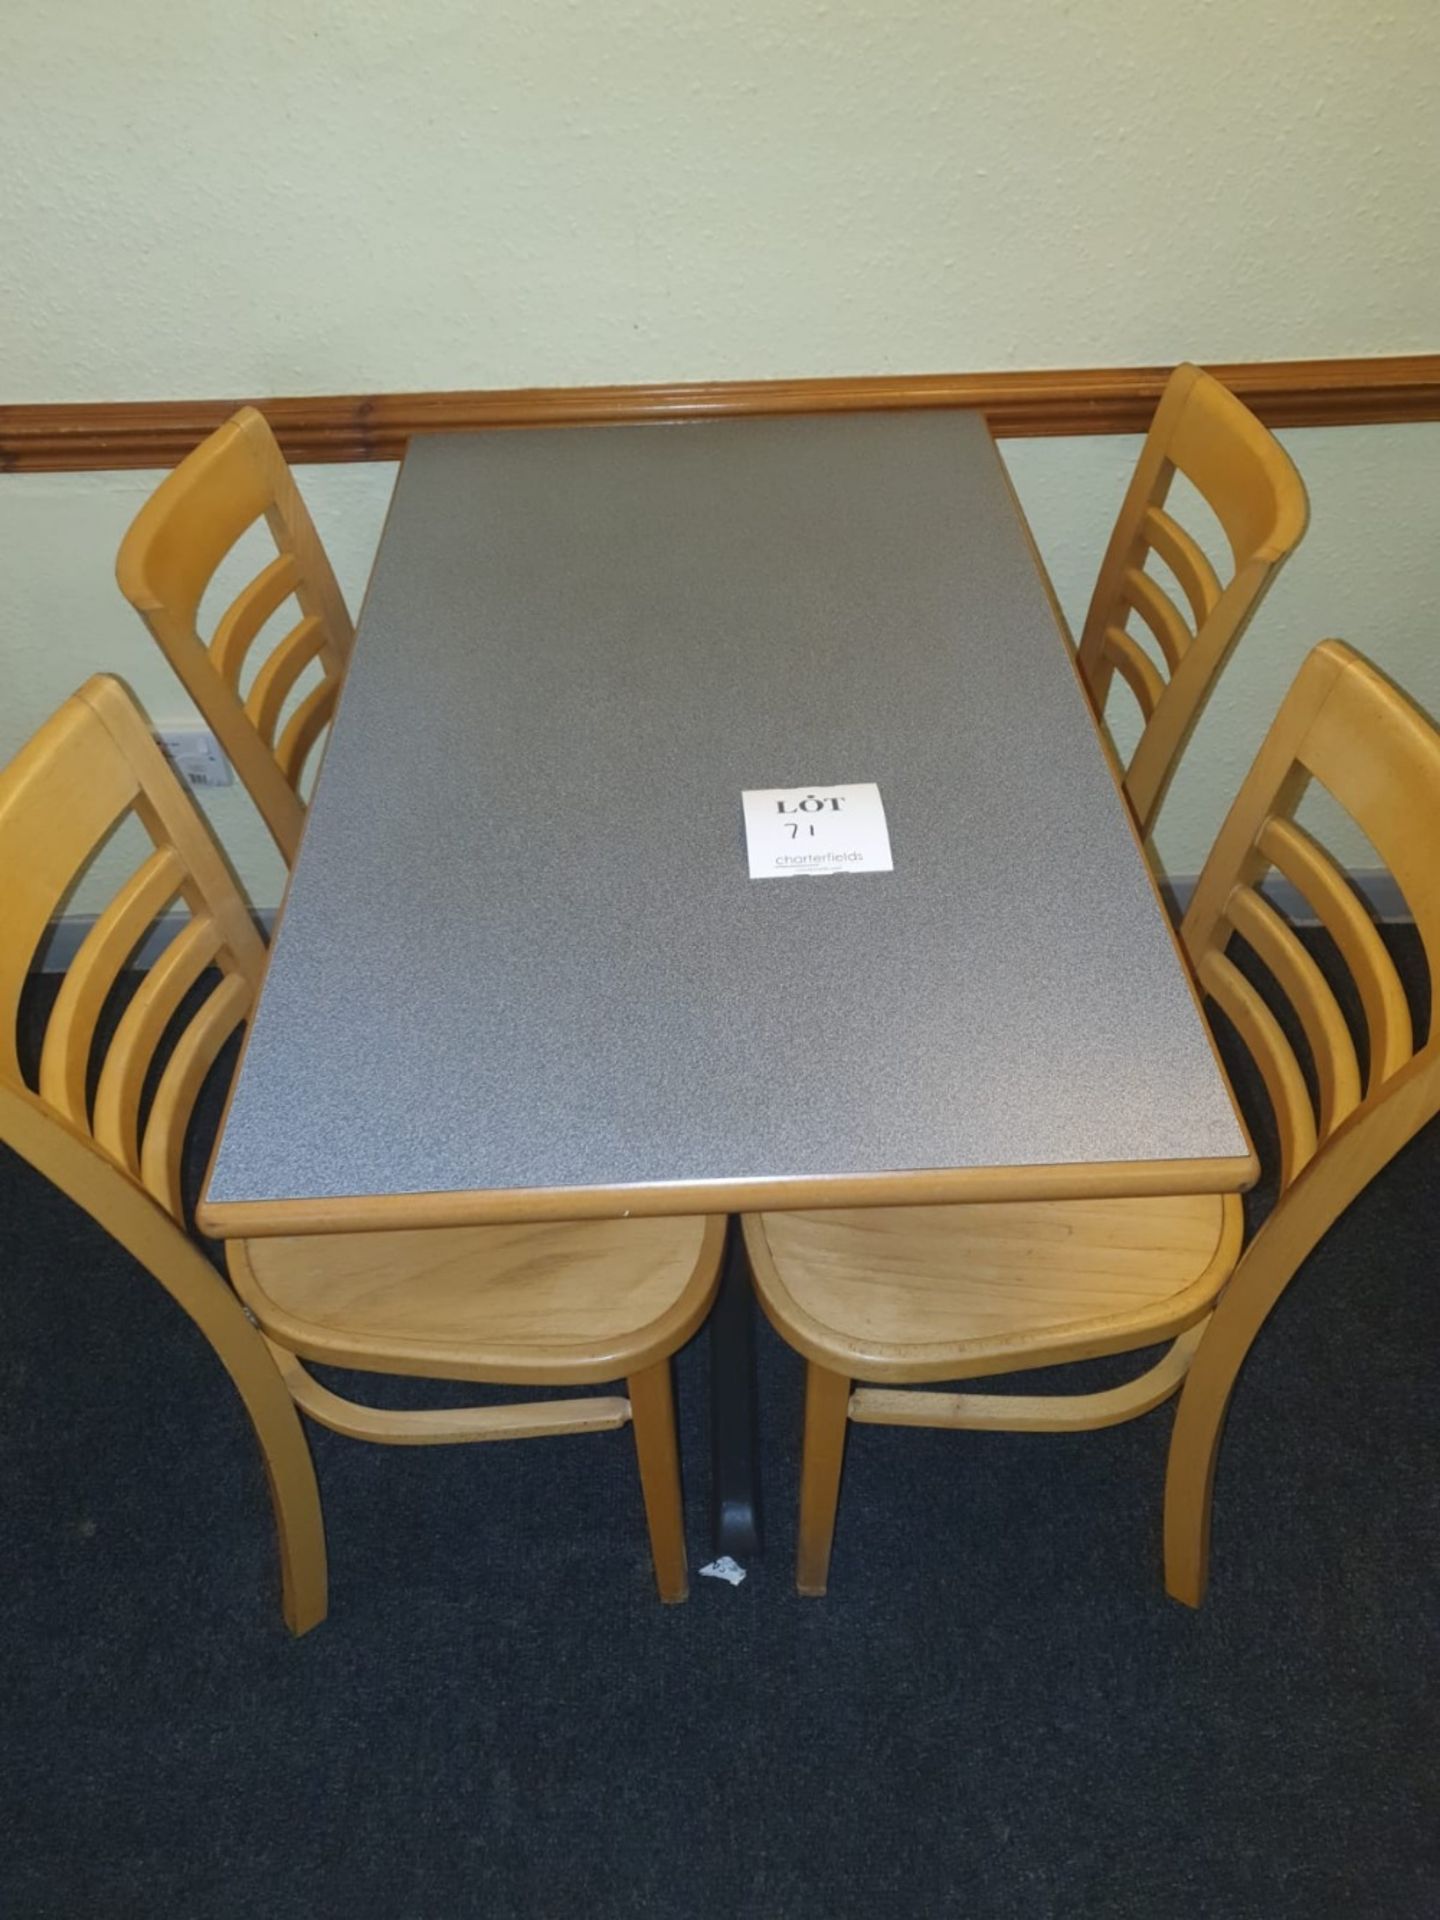 Four seater table and 4 - chairs